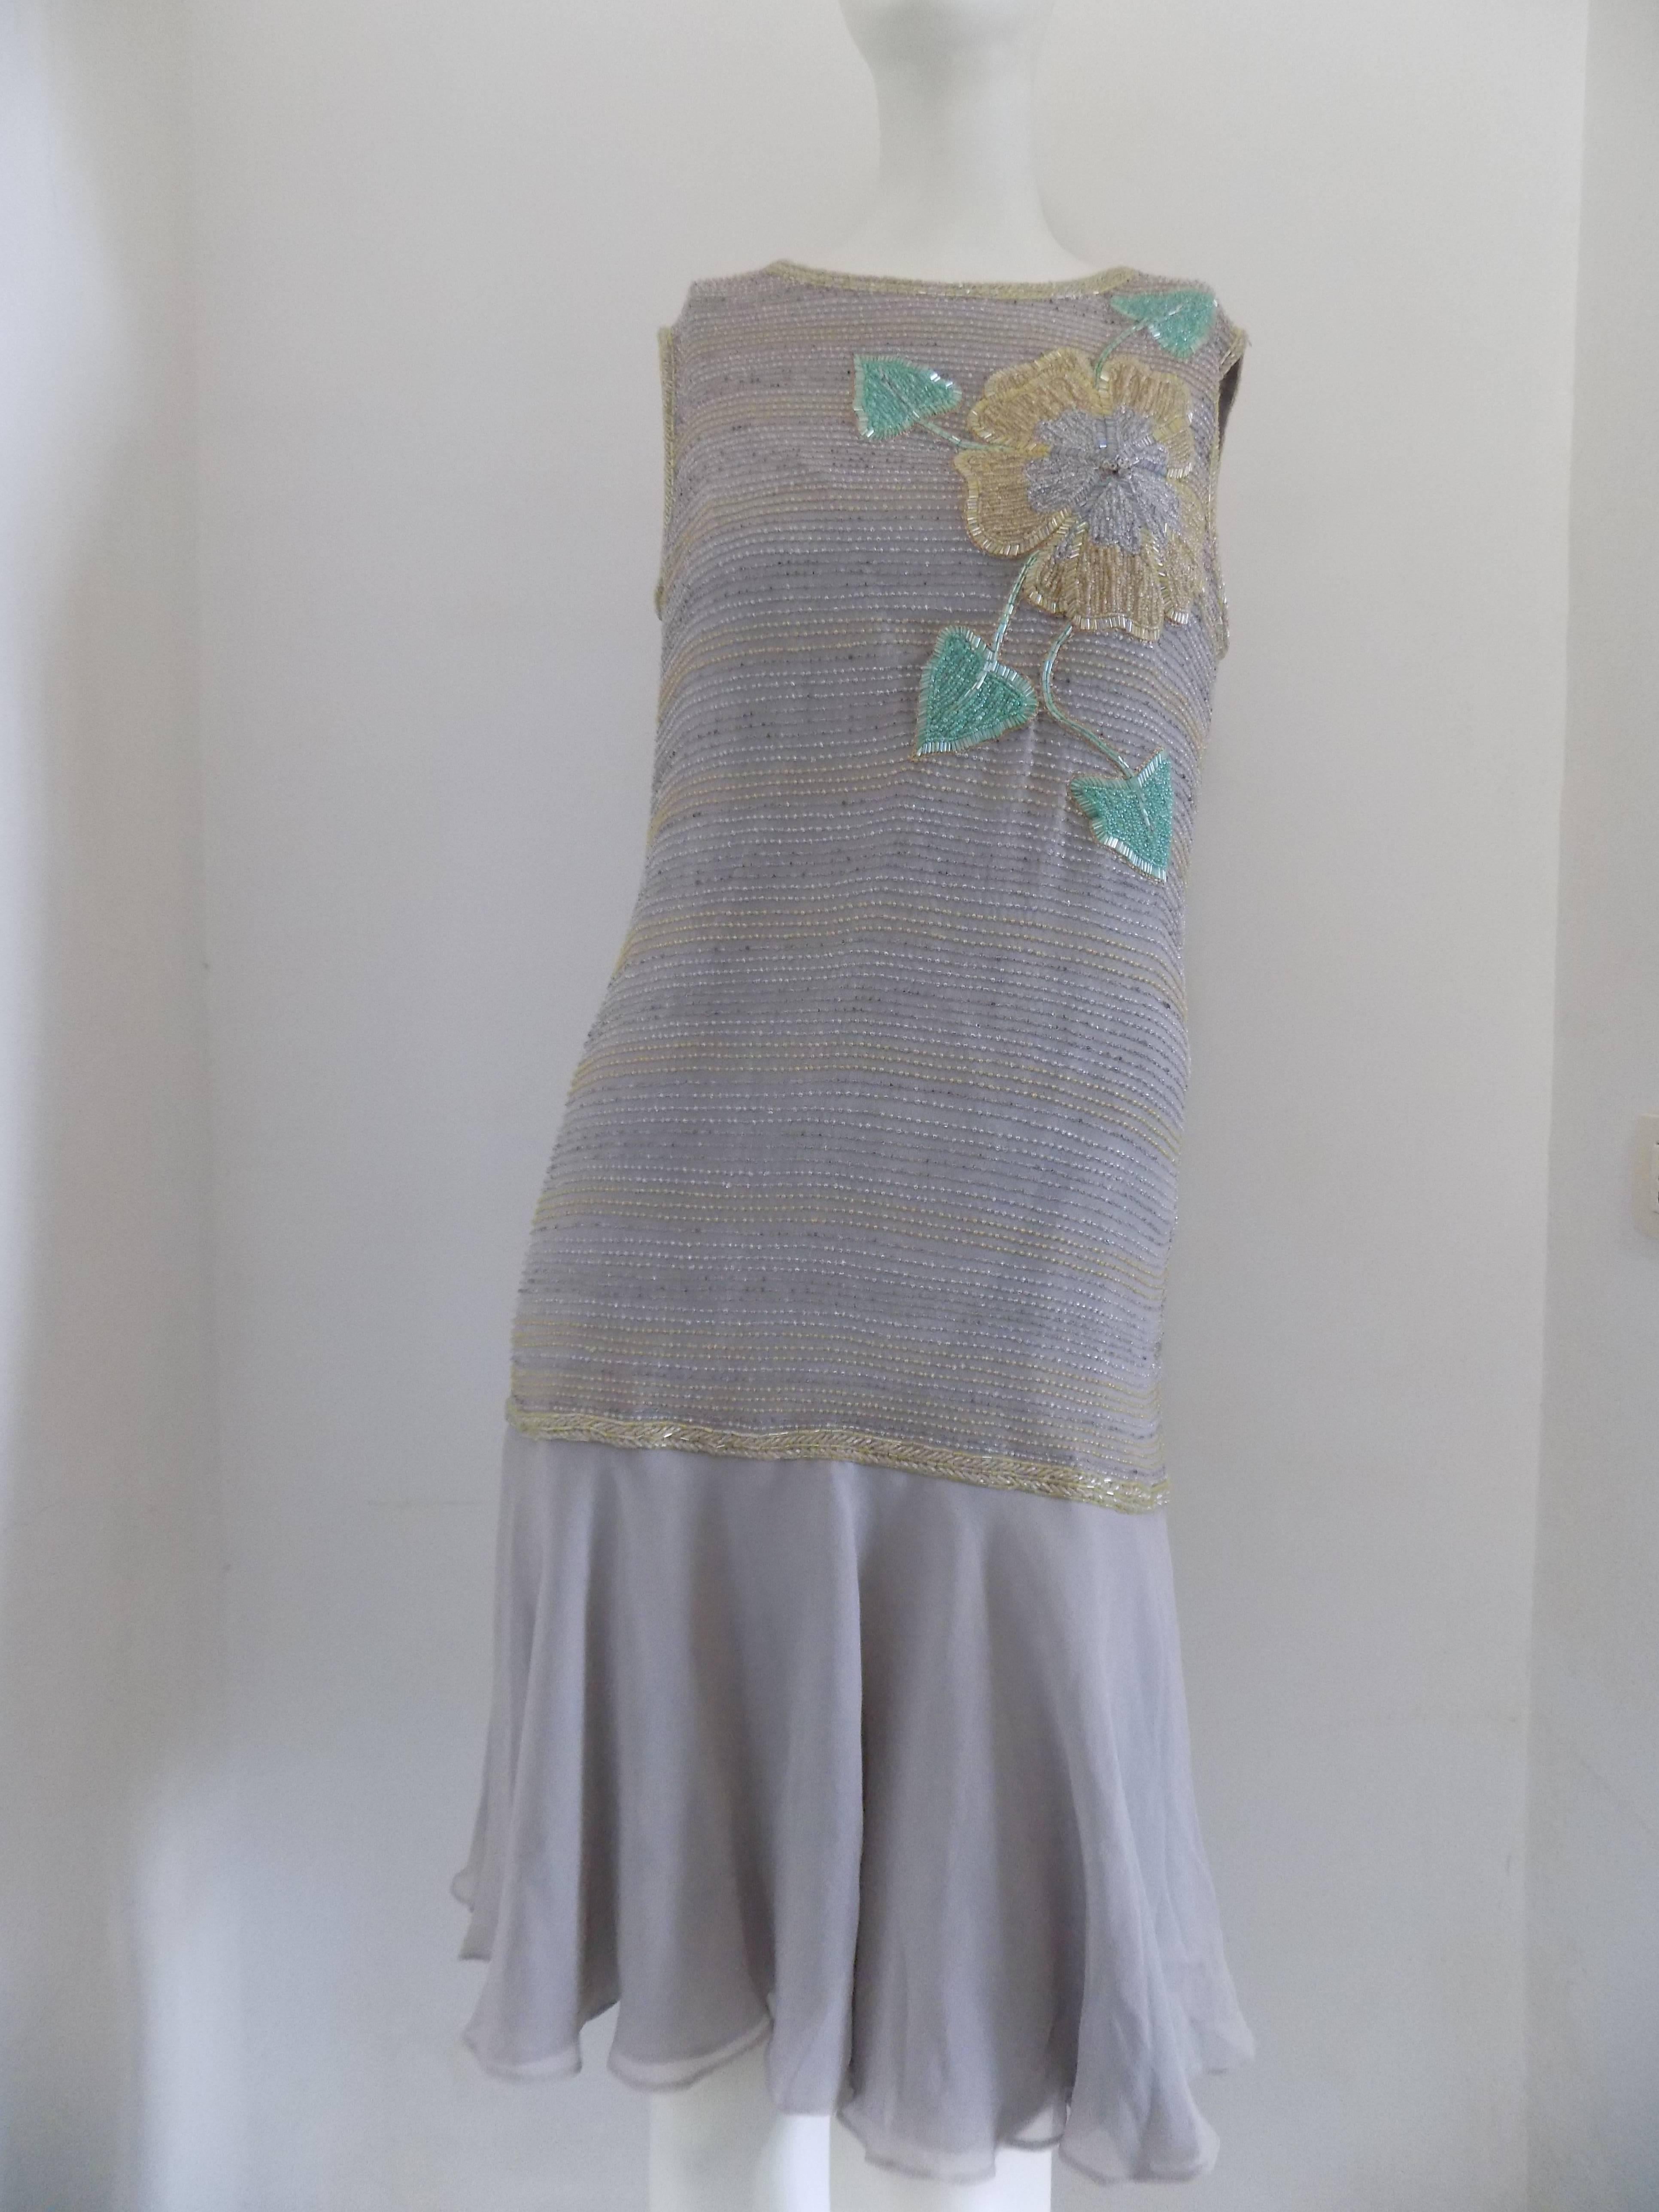 simon and cailand's grey long dress
totally made in france in italian size range 42
100% silk